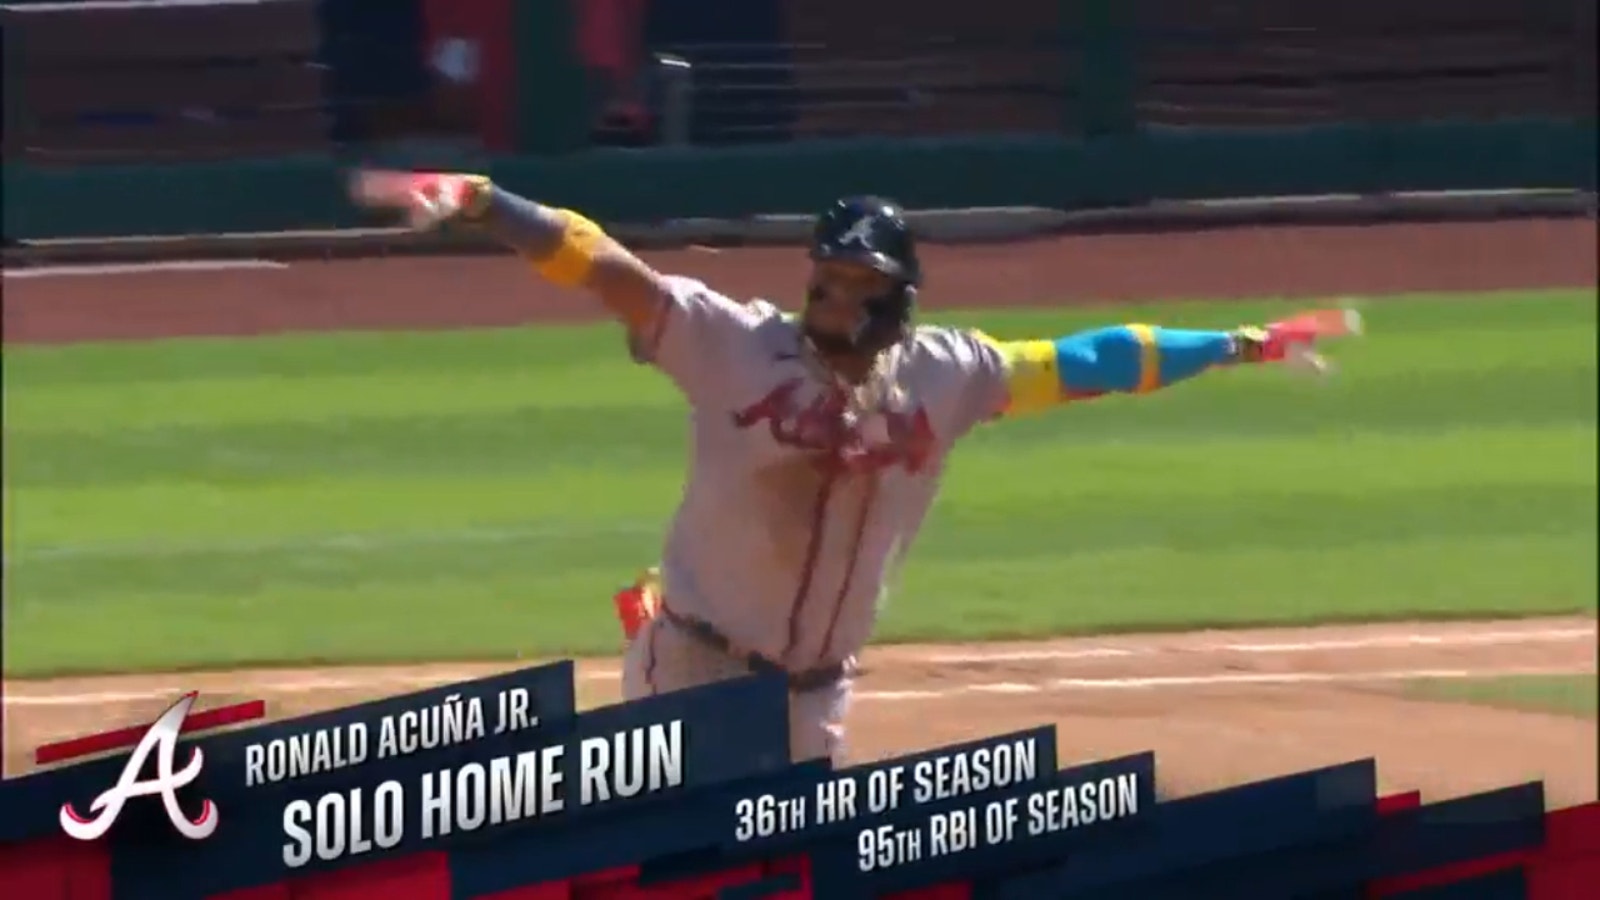 Ronald Acuña Jr. crushes his 36th home run of the season vs. the Phillies